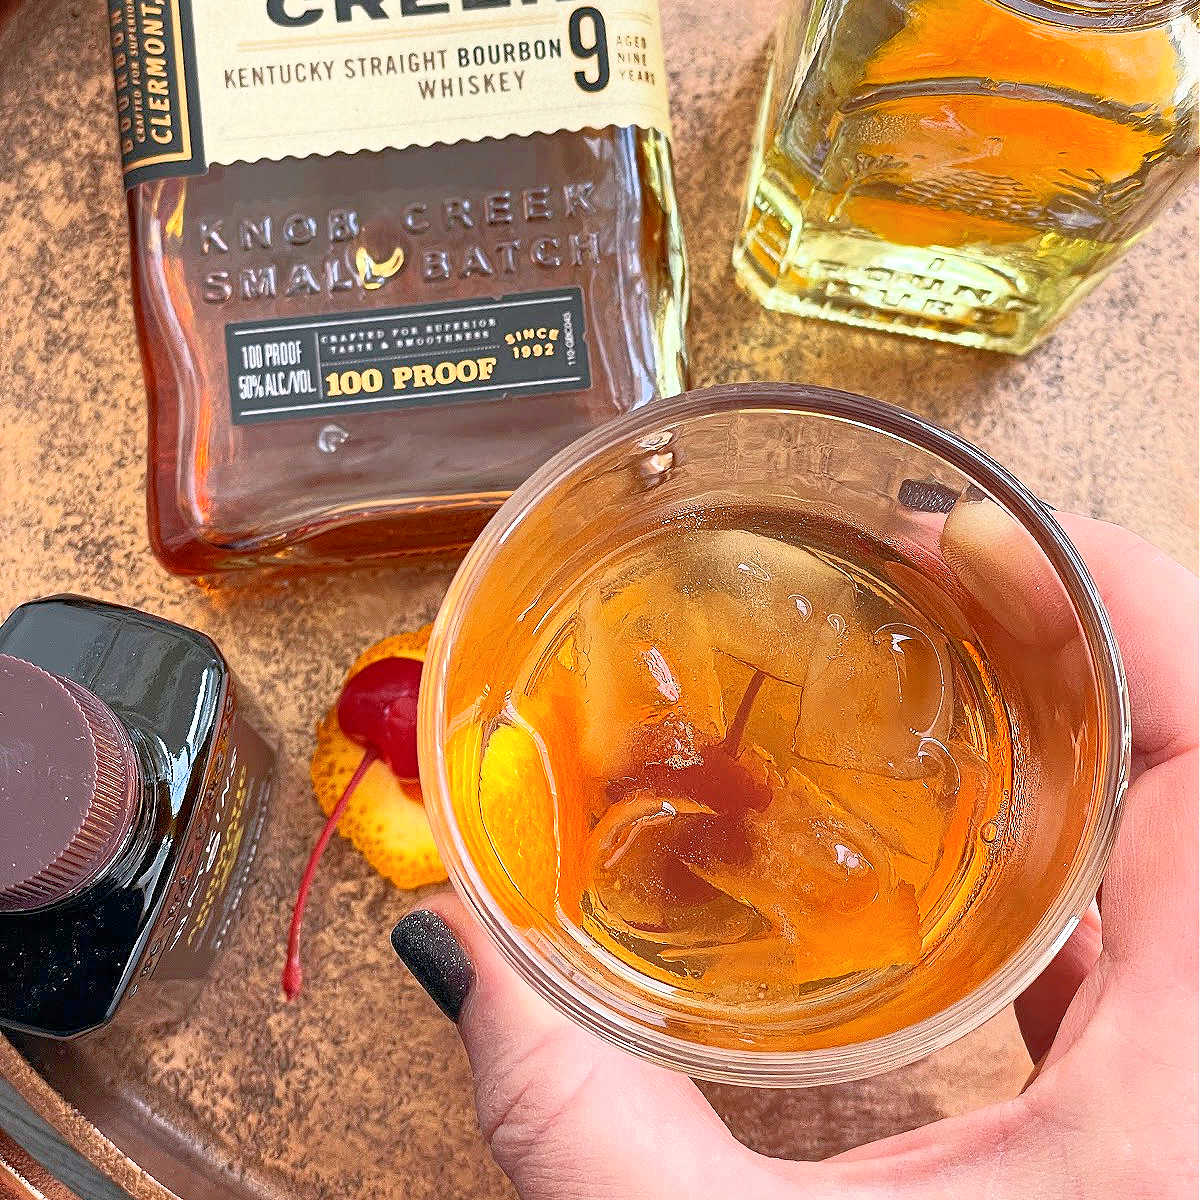 Does The Type Of Ice You Pair With Bourbon Actually Make A Difference?